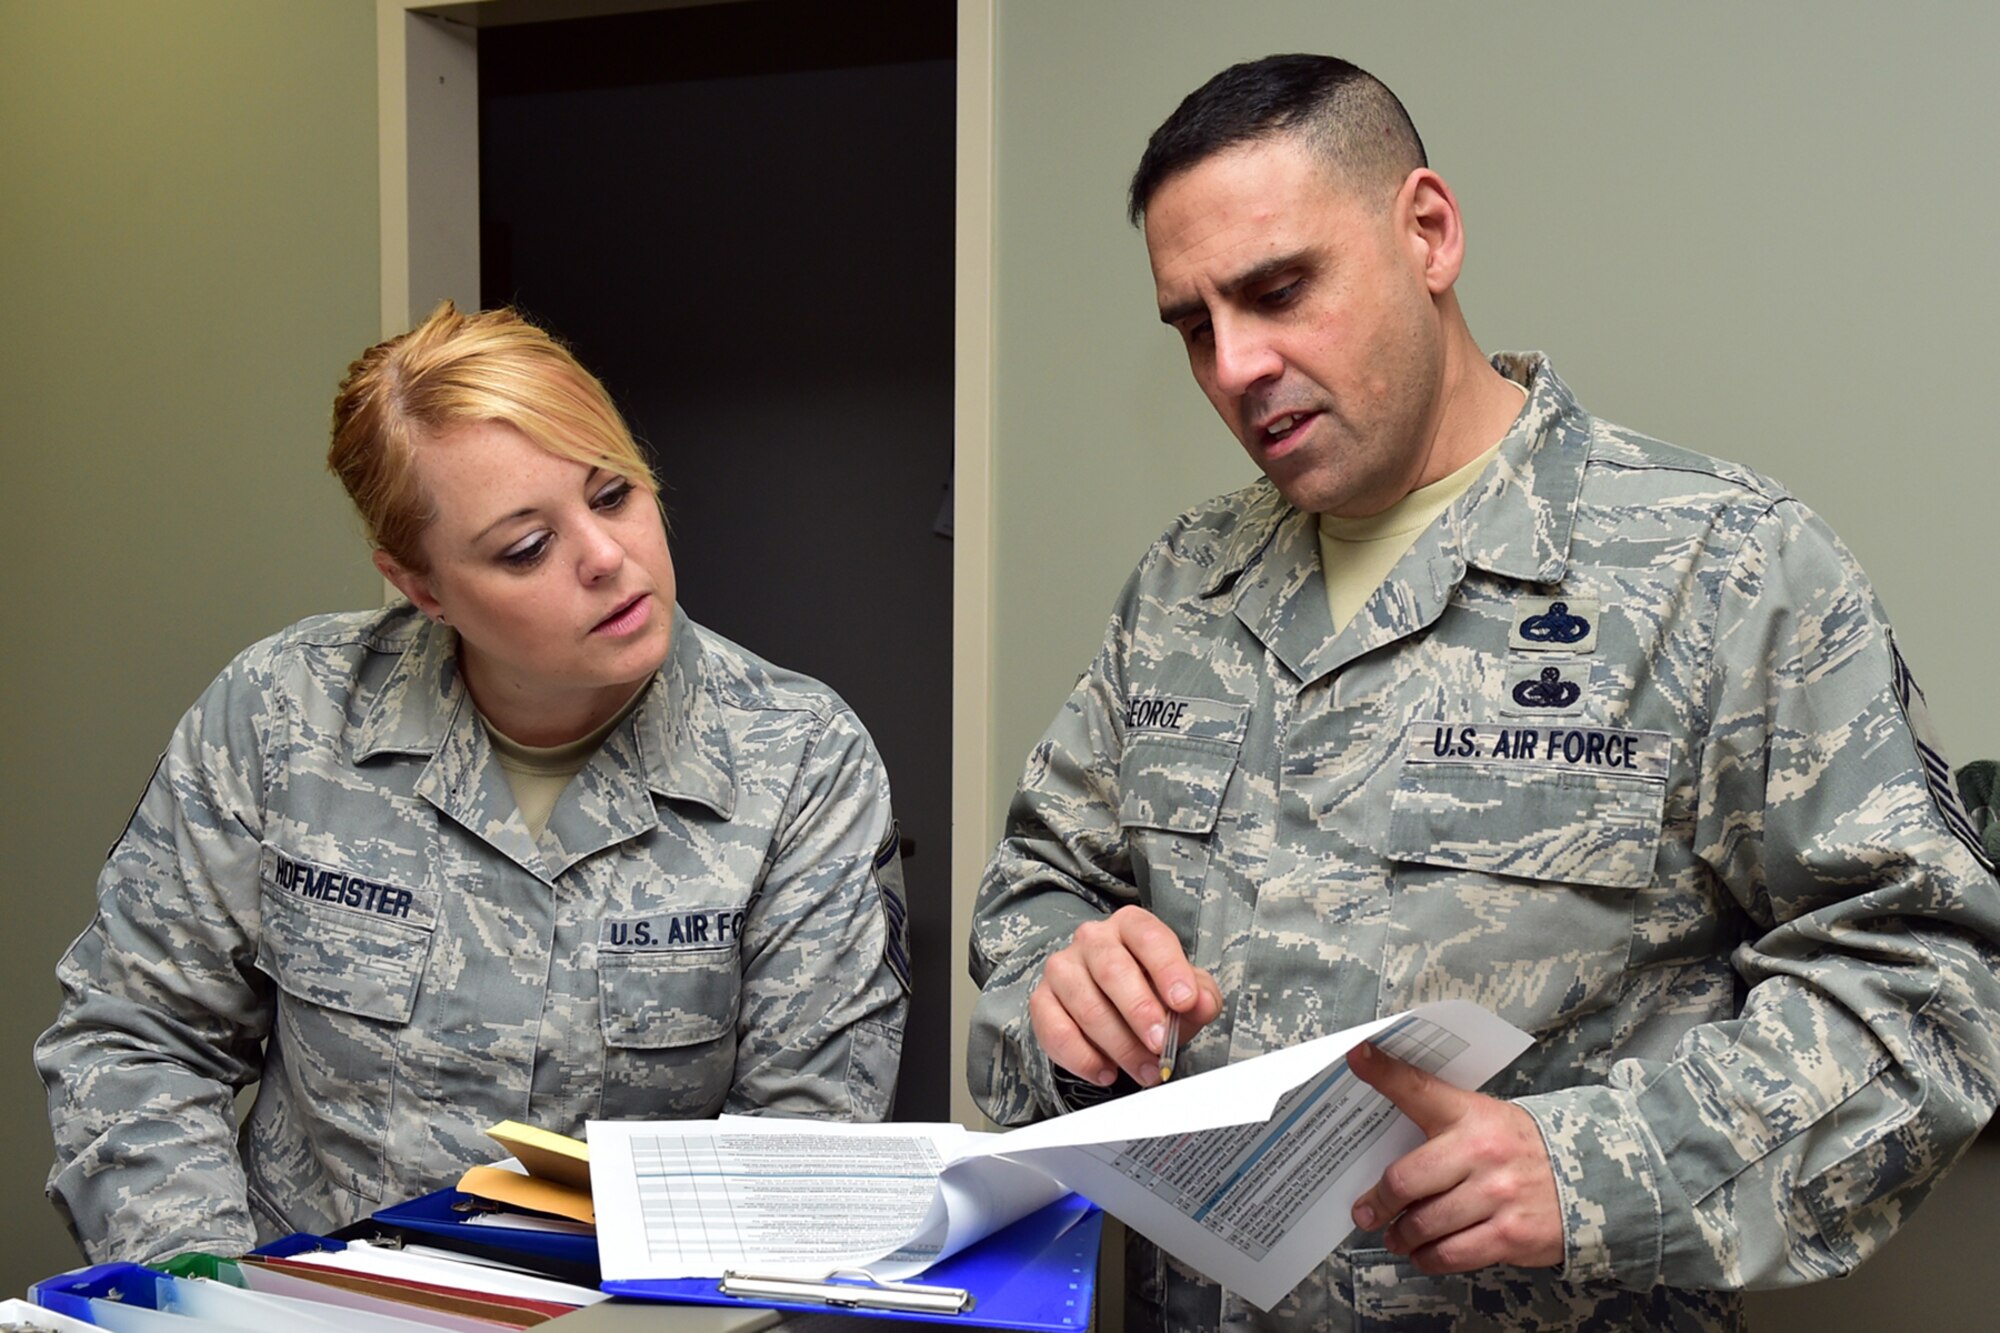 Air Force Reserve Senior Master Sgt. Robert George (right) reviews a requirements check list with Master Sgt. Sarah Hofmeister during the Patriot Penguin Mobilization Deployment exercise her April 11, 2015. George is Chief of War Plans and Mobilization for the 910th Logistics Readiness Squadron and Hofmeister is the 910th Airlift Wing Staff Unit Deployment Manager (UDM) for Airlift Wing staff. (U.S. Air Force photo/Tech. Sgt. James Brock)